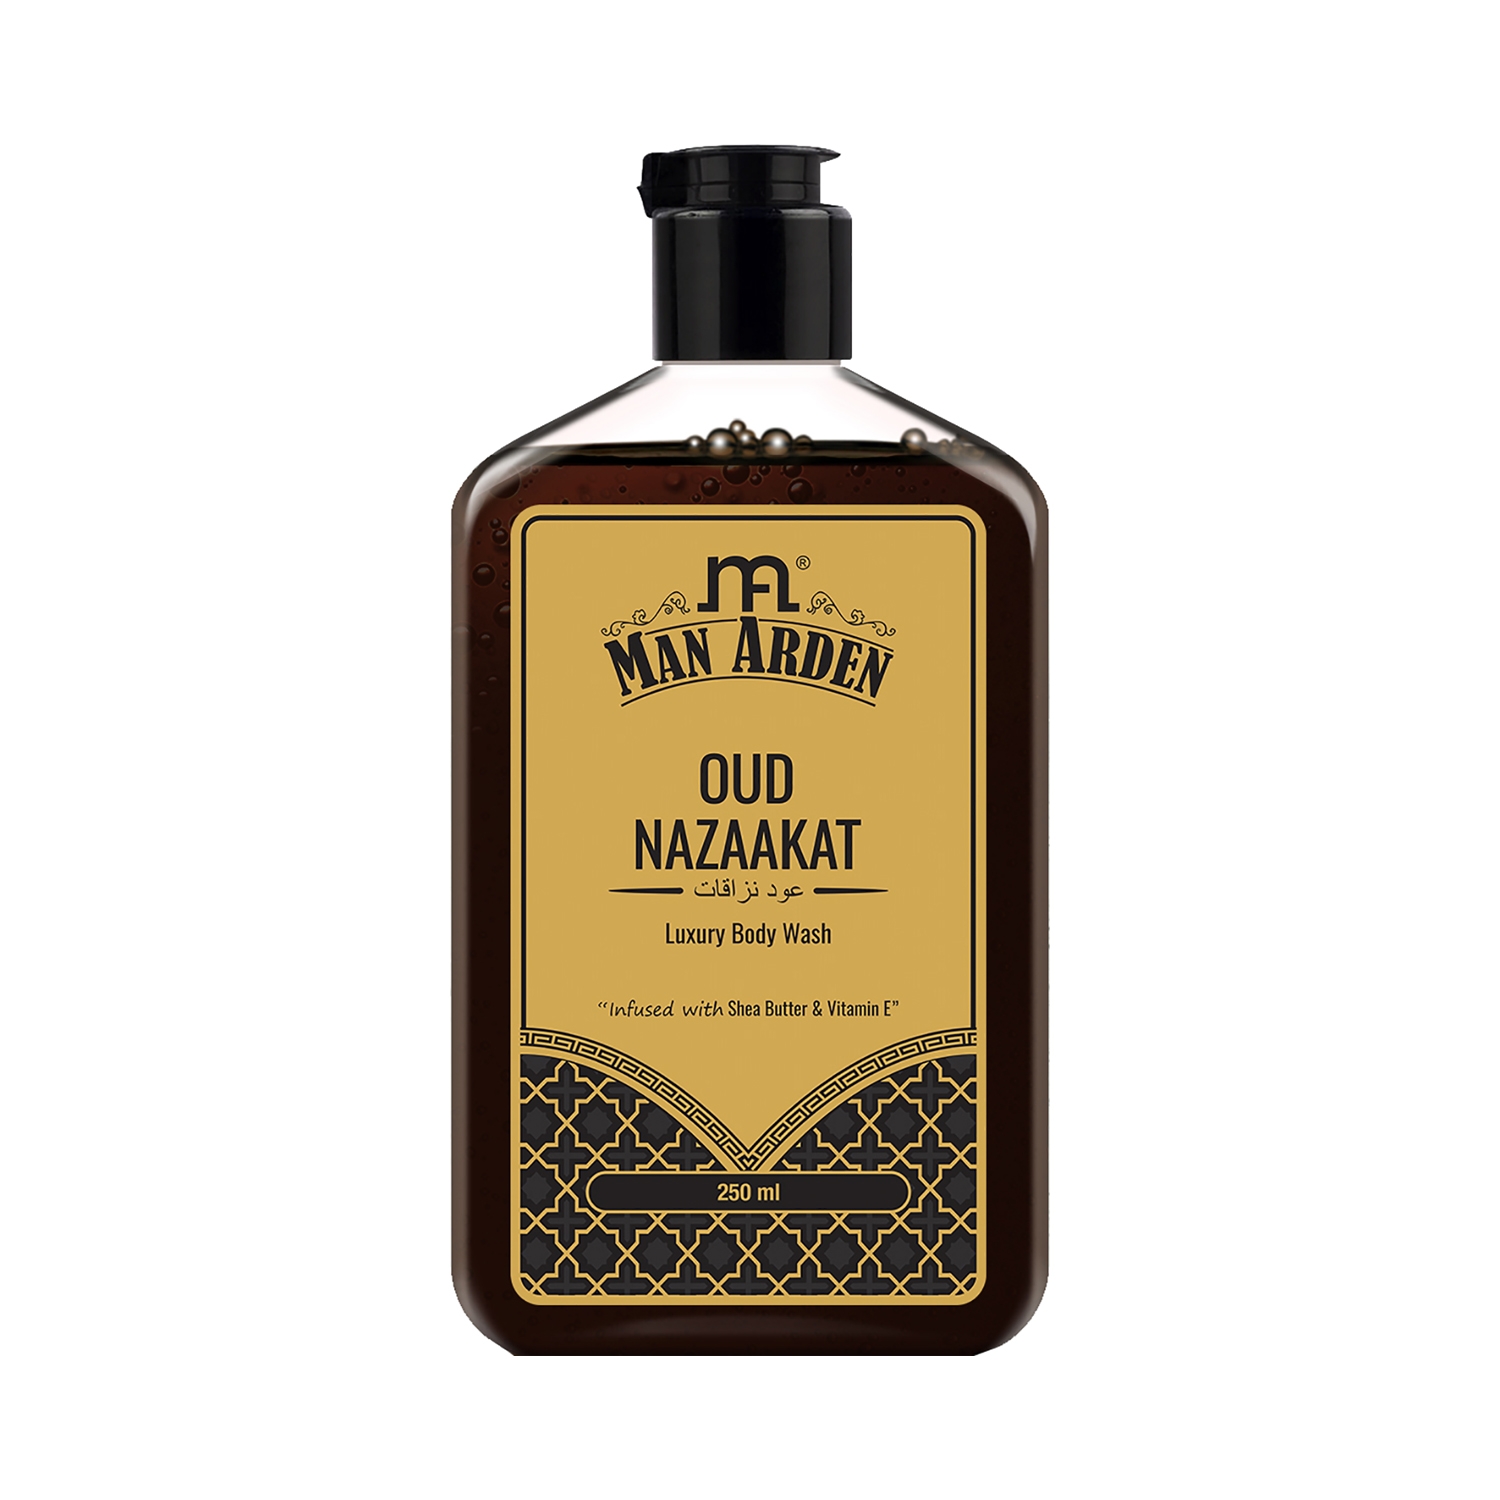 Man Arden | Man Arden Oud Nazaakat Luxury Body Wash Infused With Shea Butter & Vitamin E (250ml)